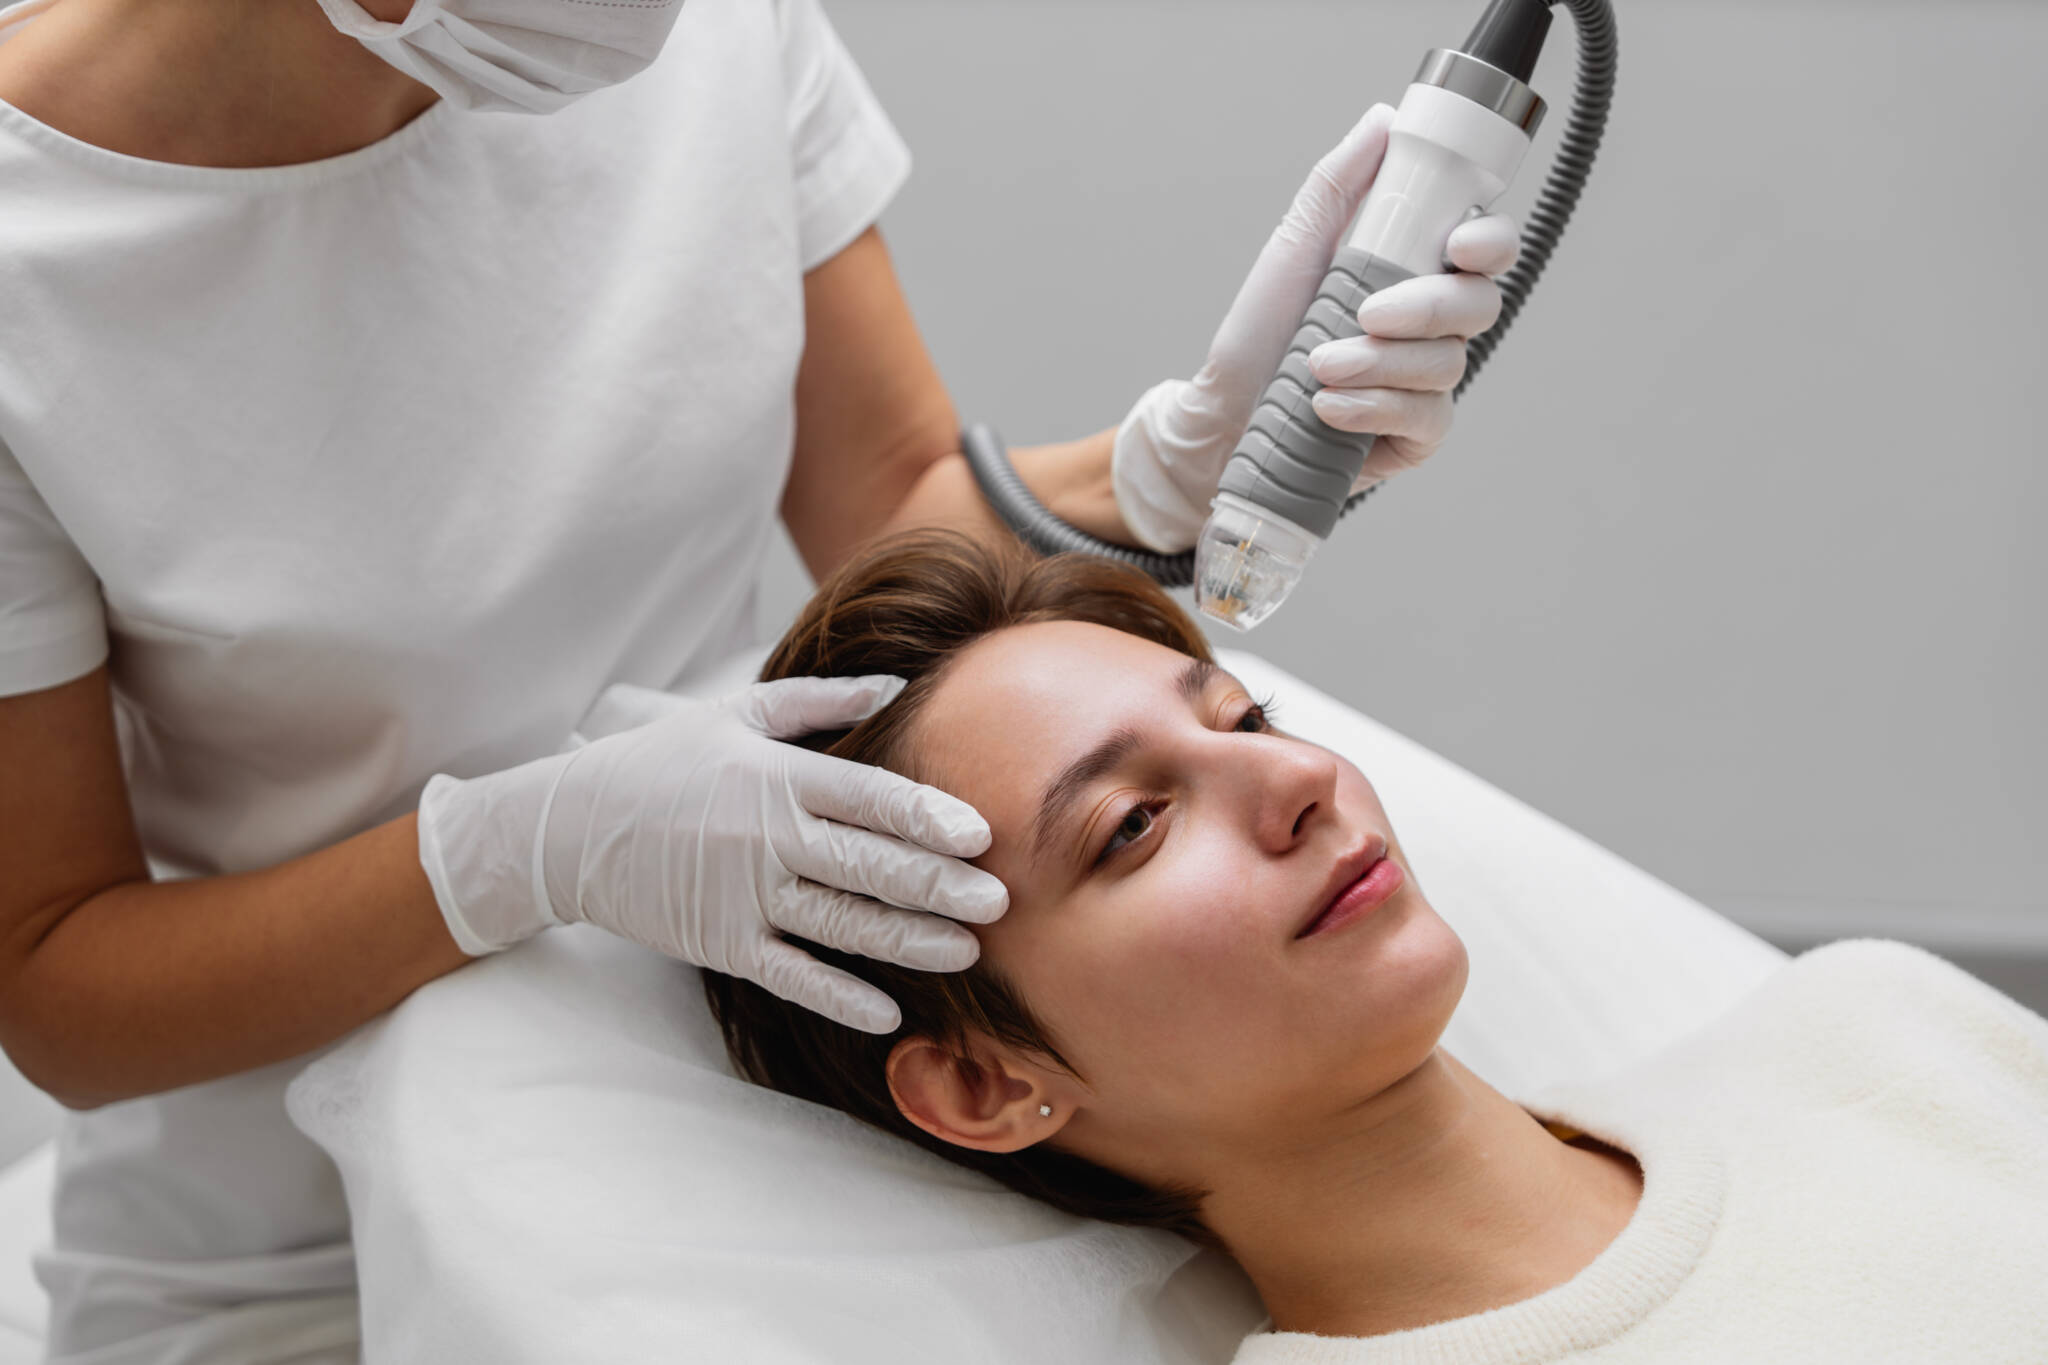 Woman with short brown hair receives microneedling treatment from person wearing white gloves